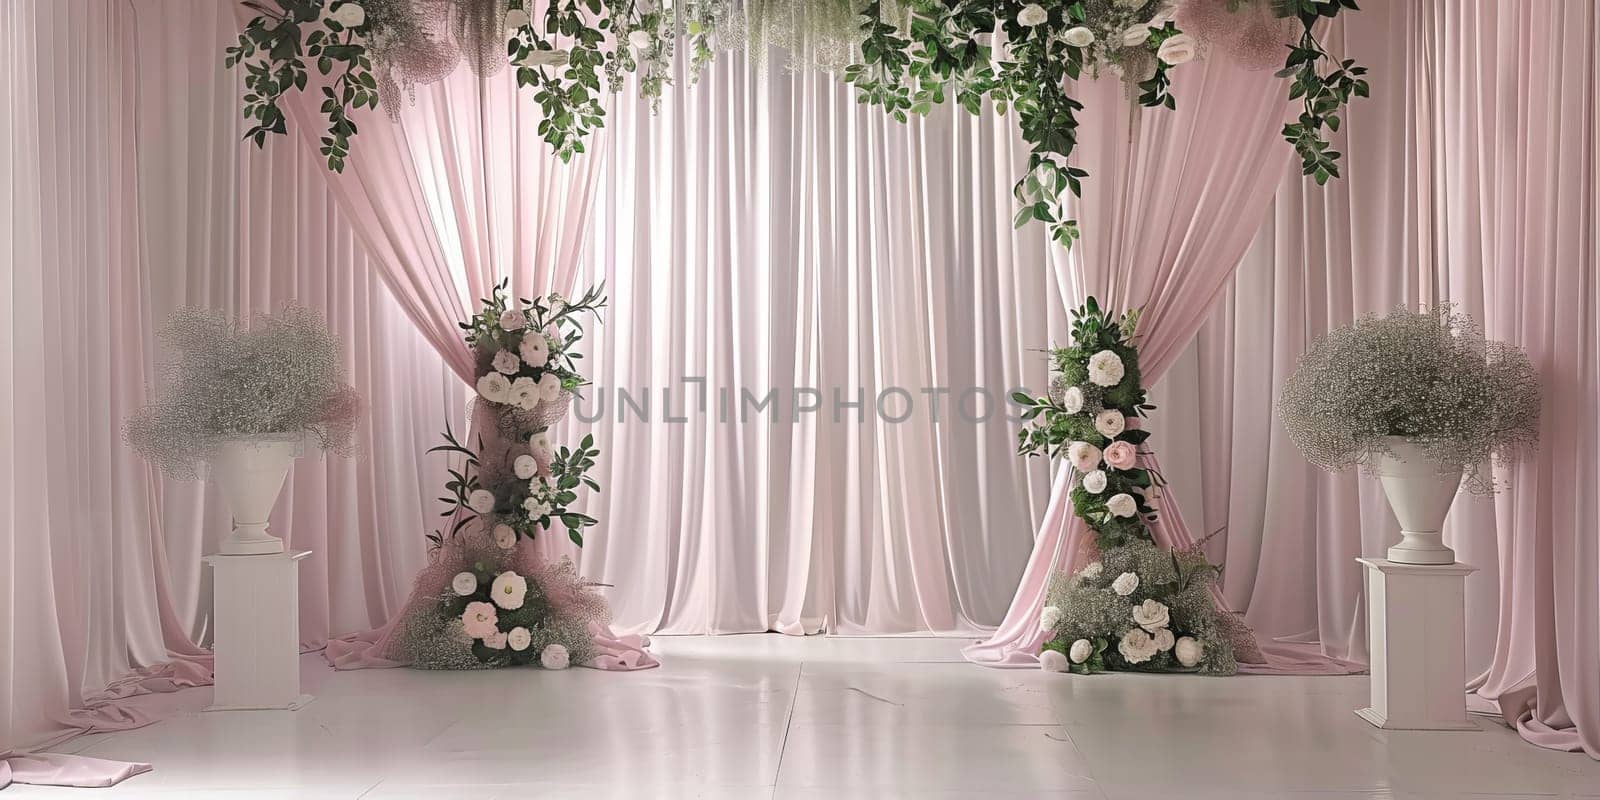 Elegant wedding decor with pink curtains and white flowers by ailike